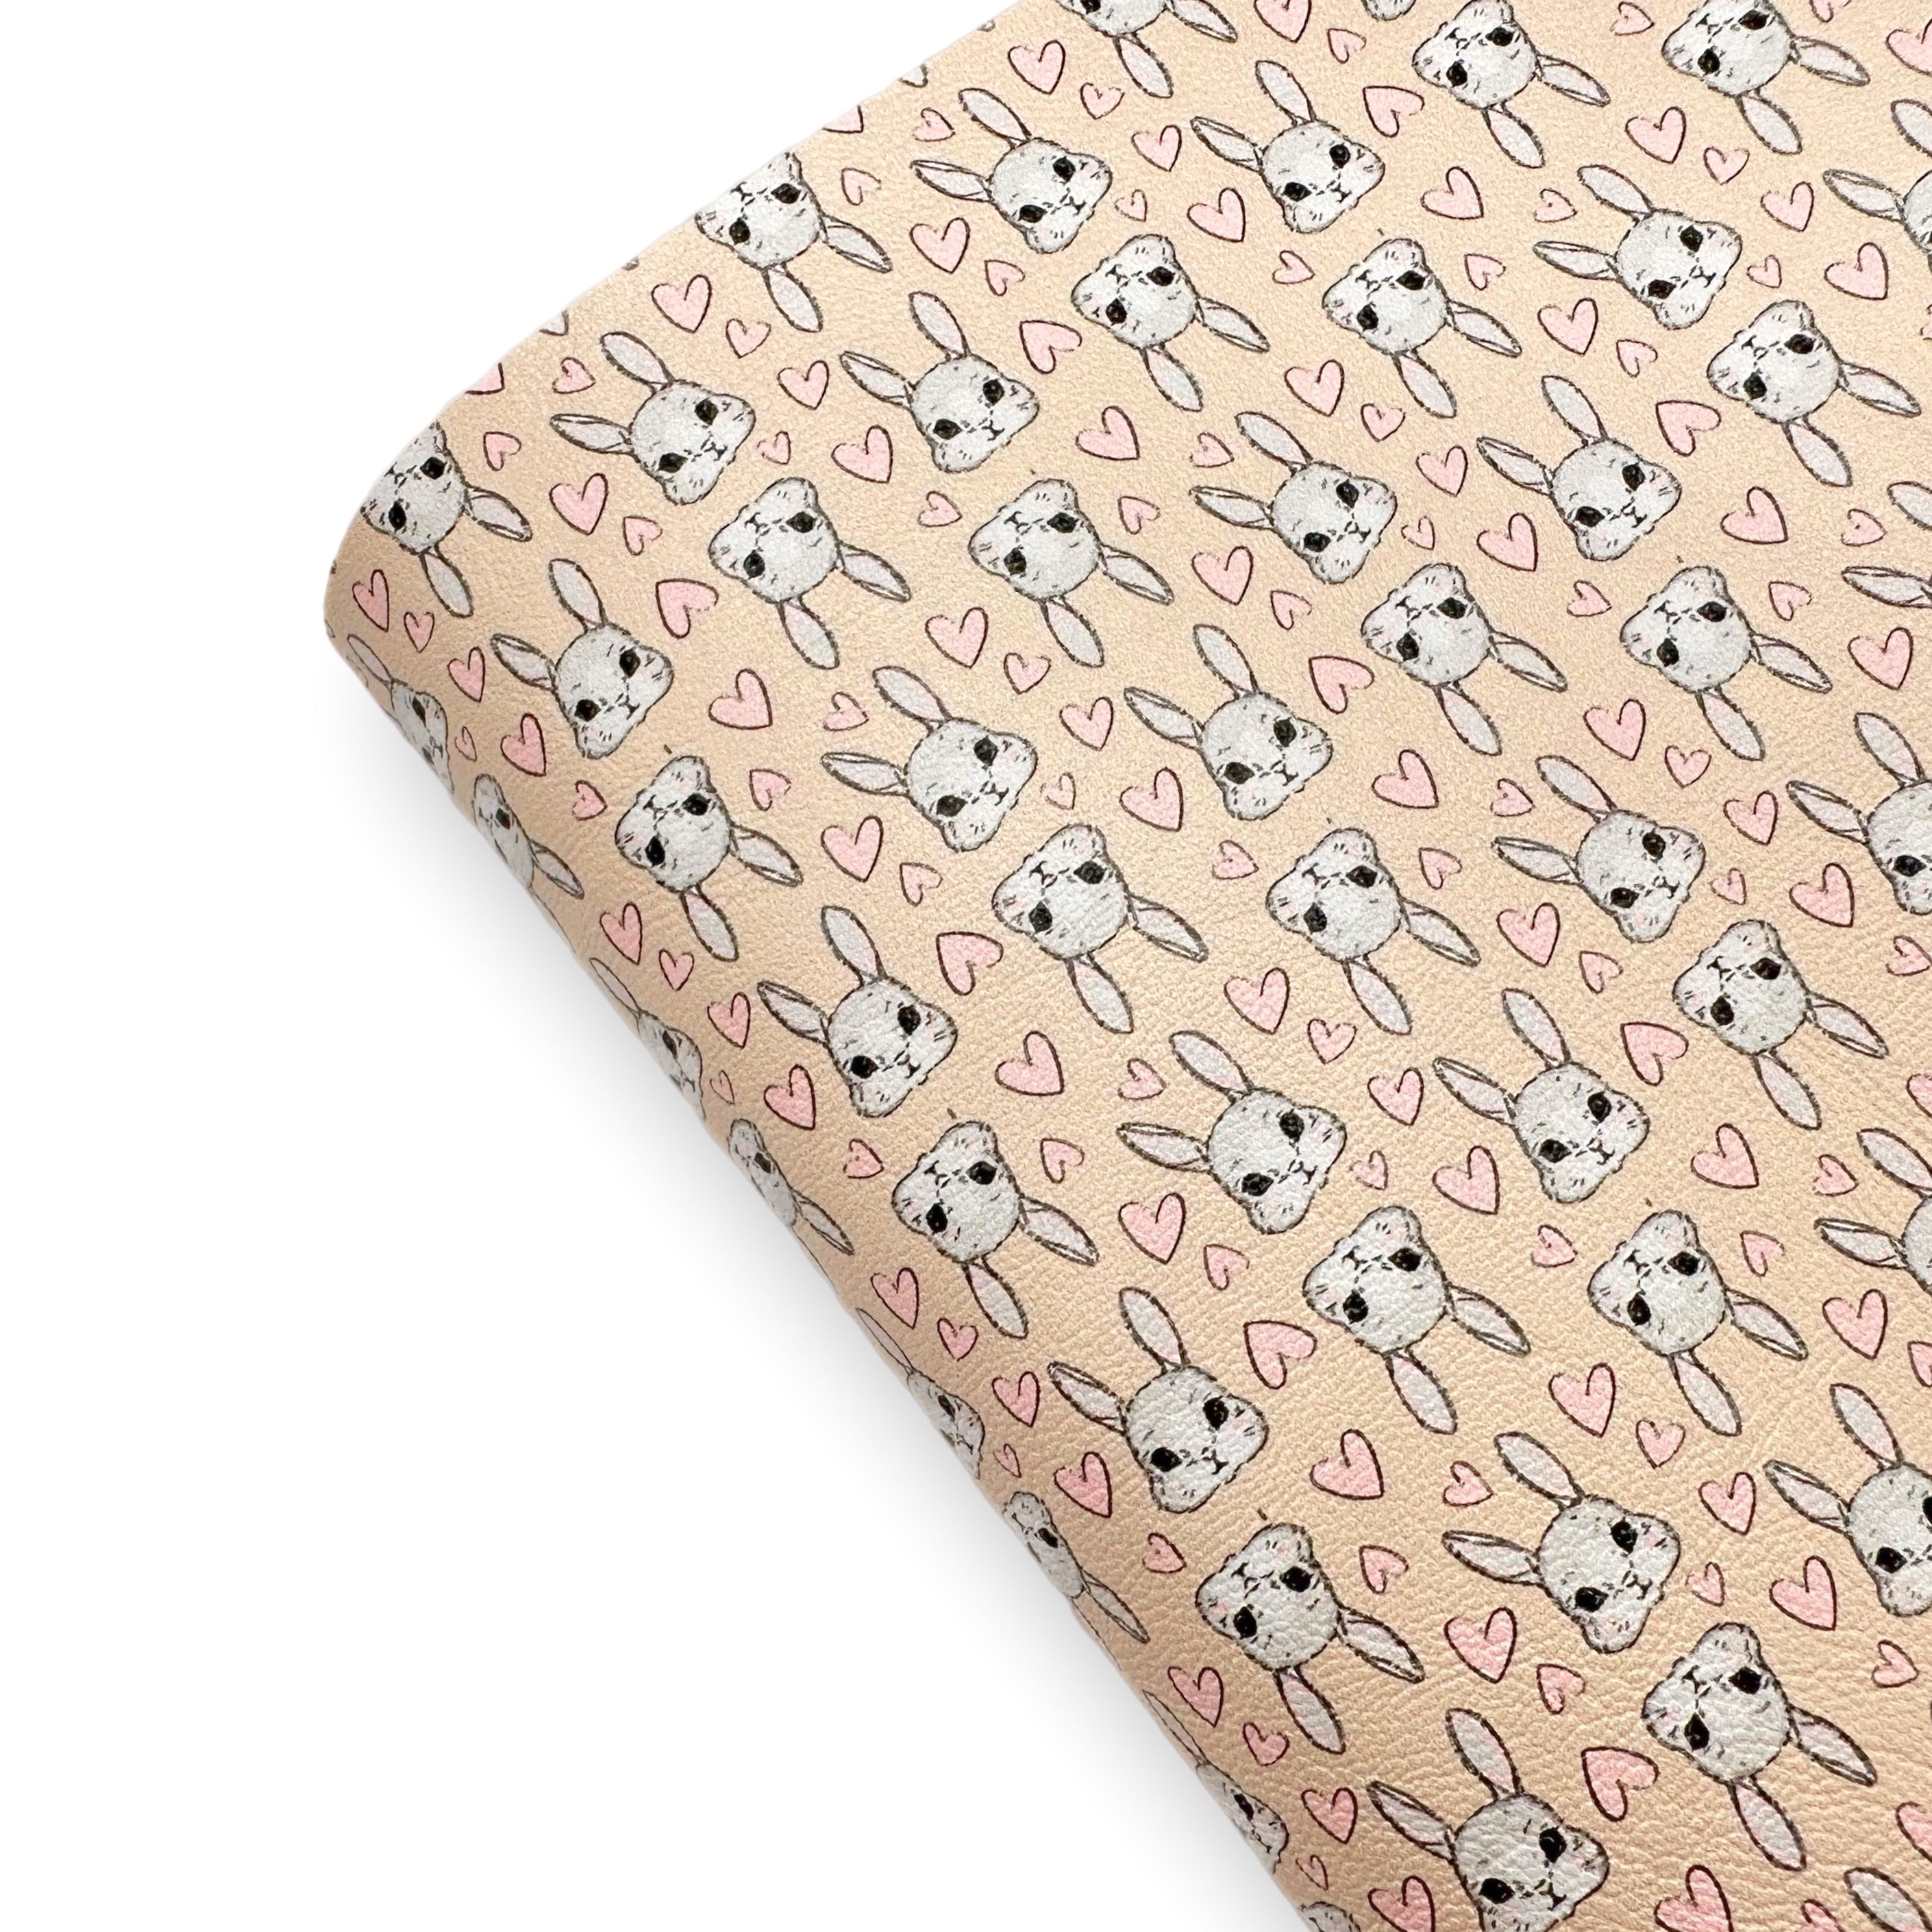 Bunny Hearts Beige Premium Faux Leather Fabric